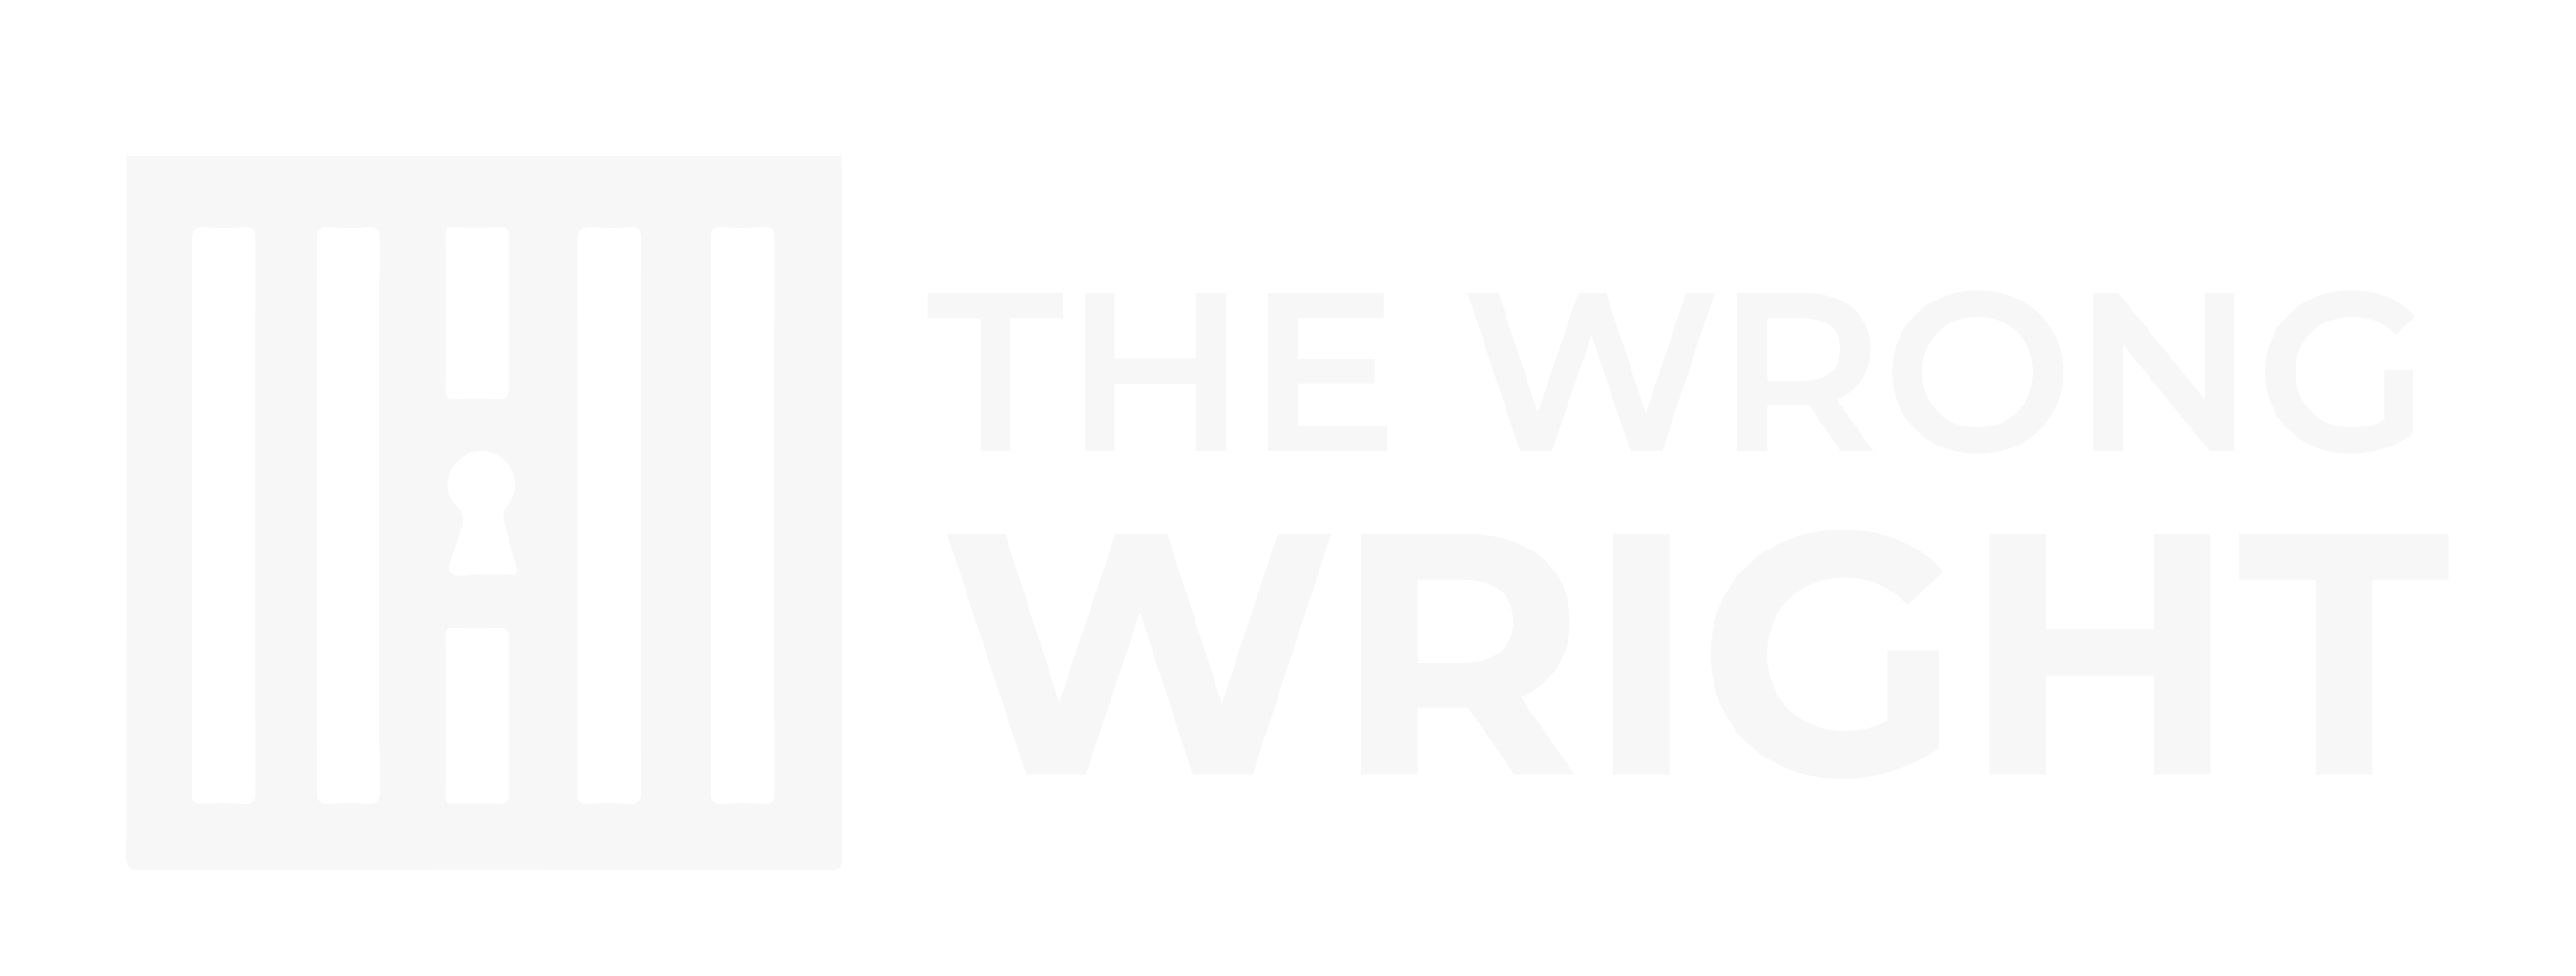 The Wrong Wright